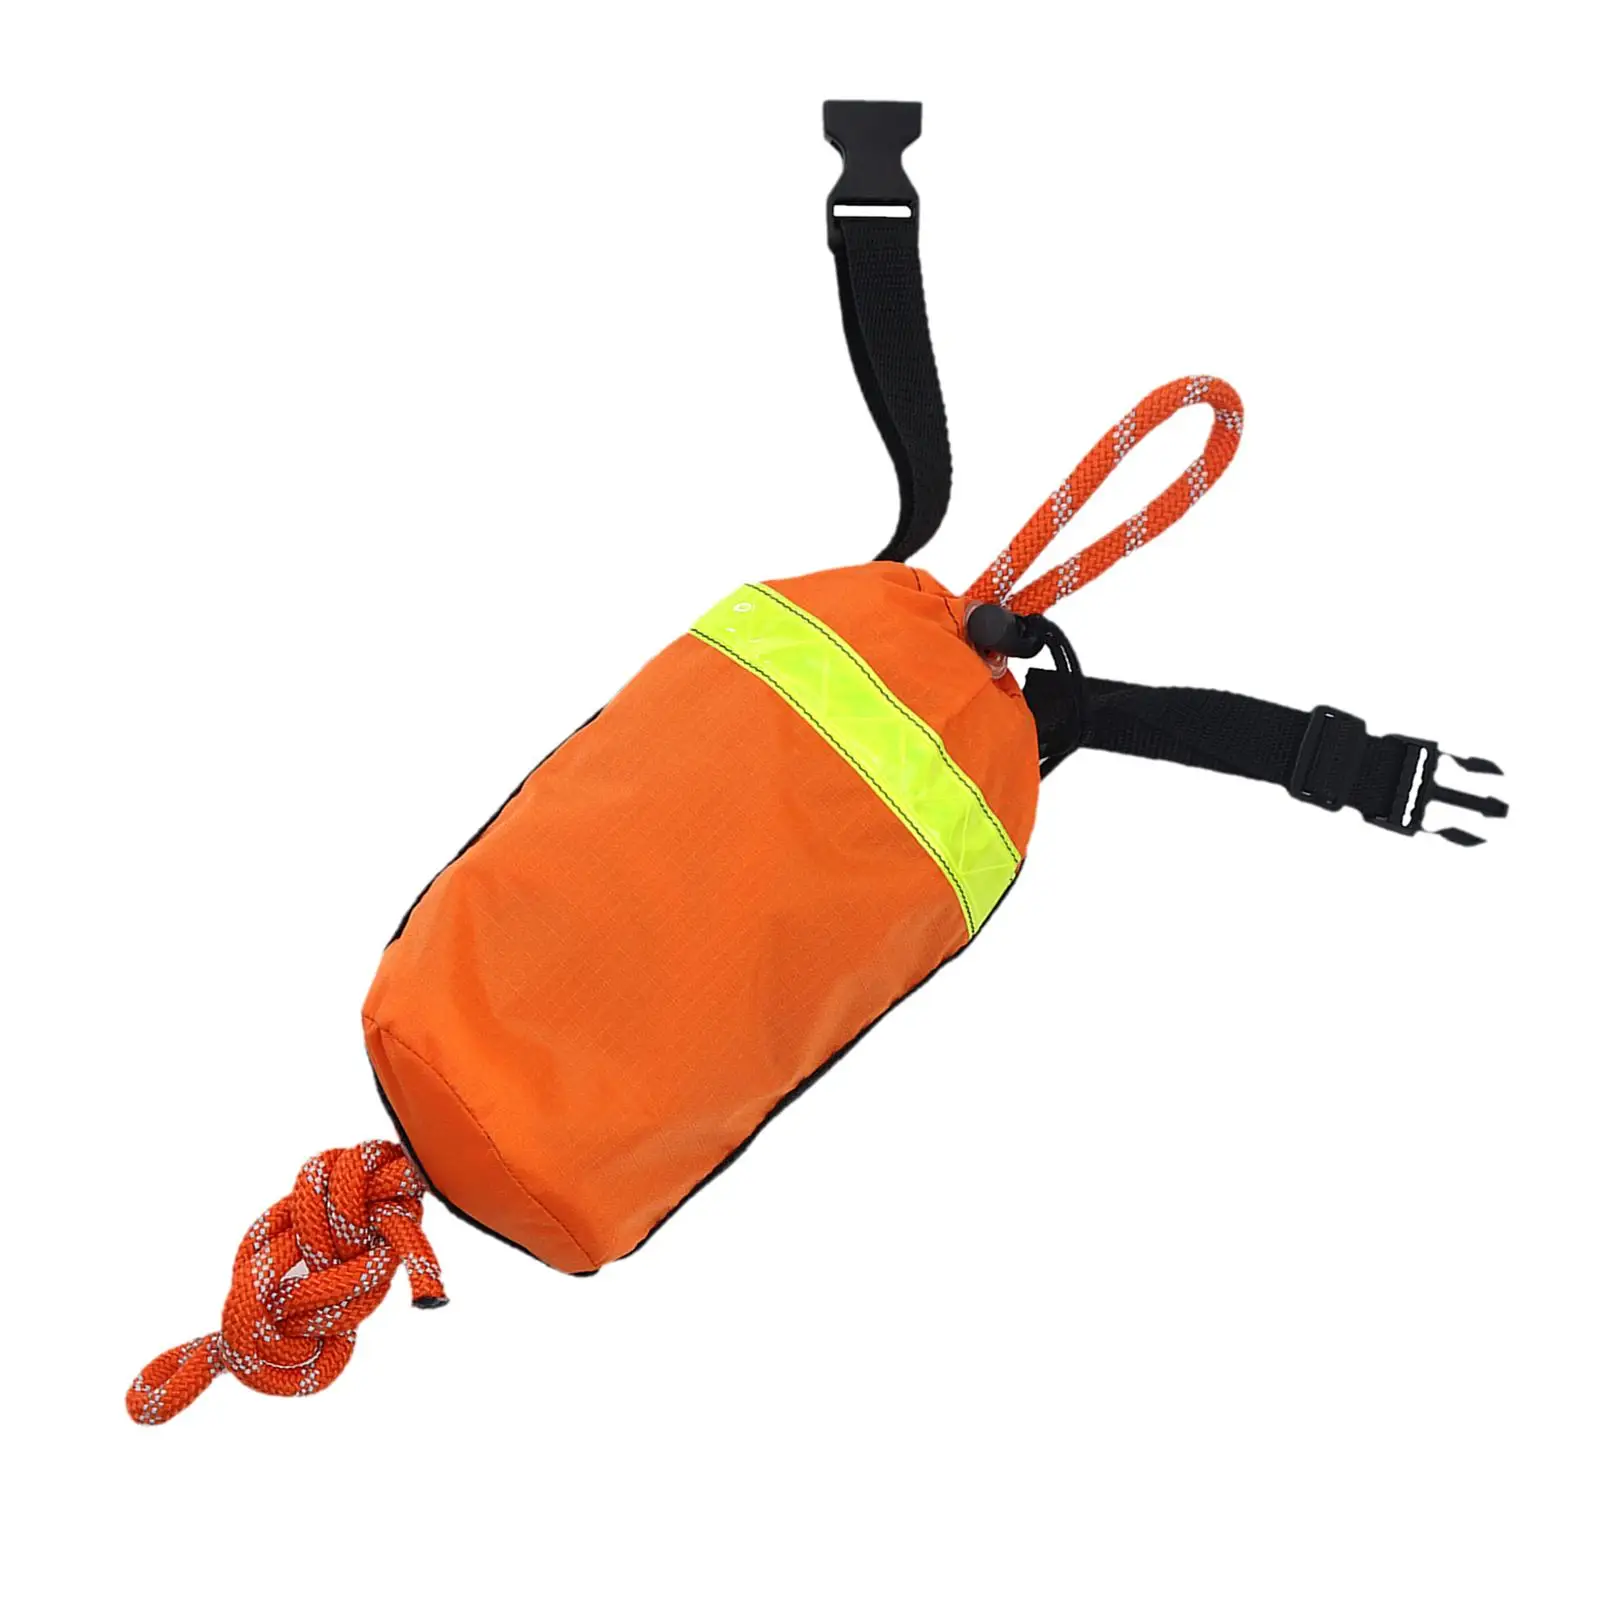 Reflective Rope Throw Bag High Visibility Accessory Device for Buoyant Dinghy Canoeing Ice Fishing Boating Swimming